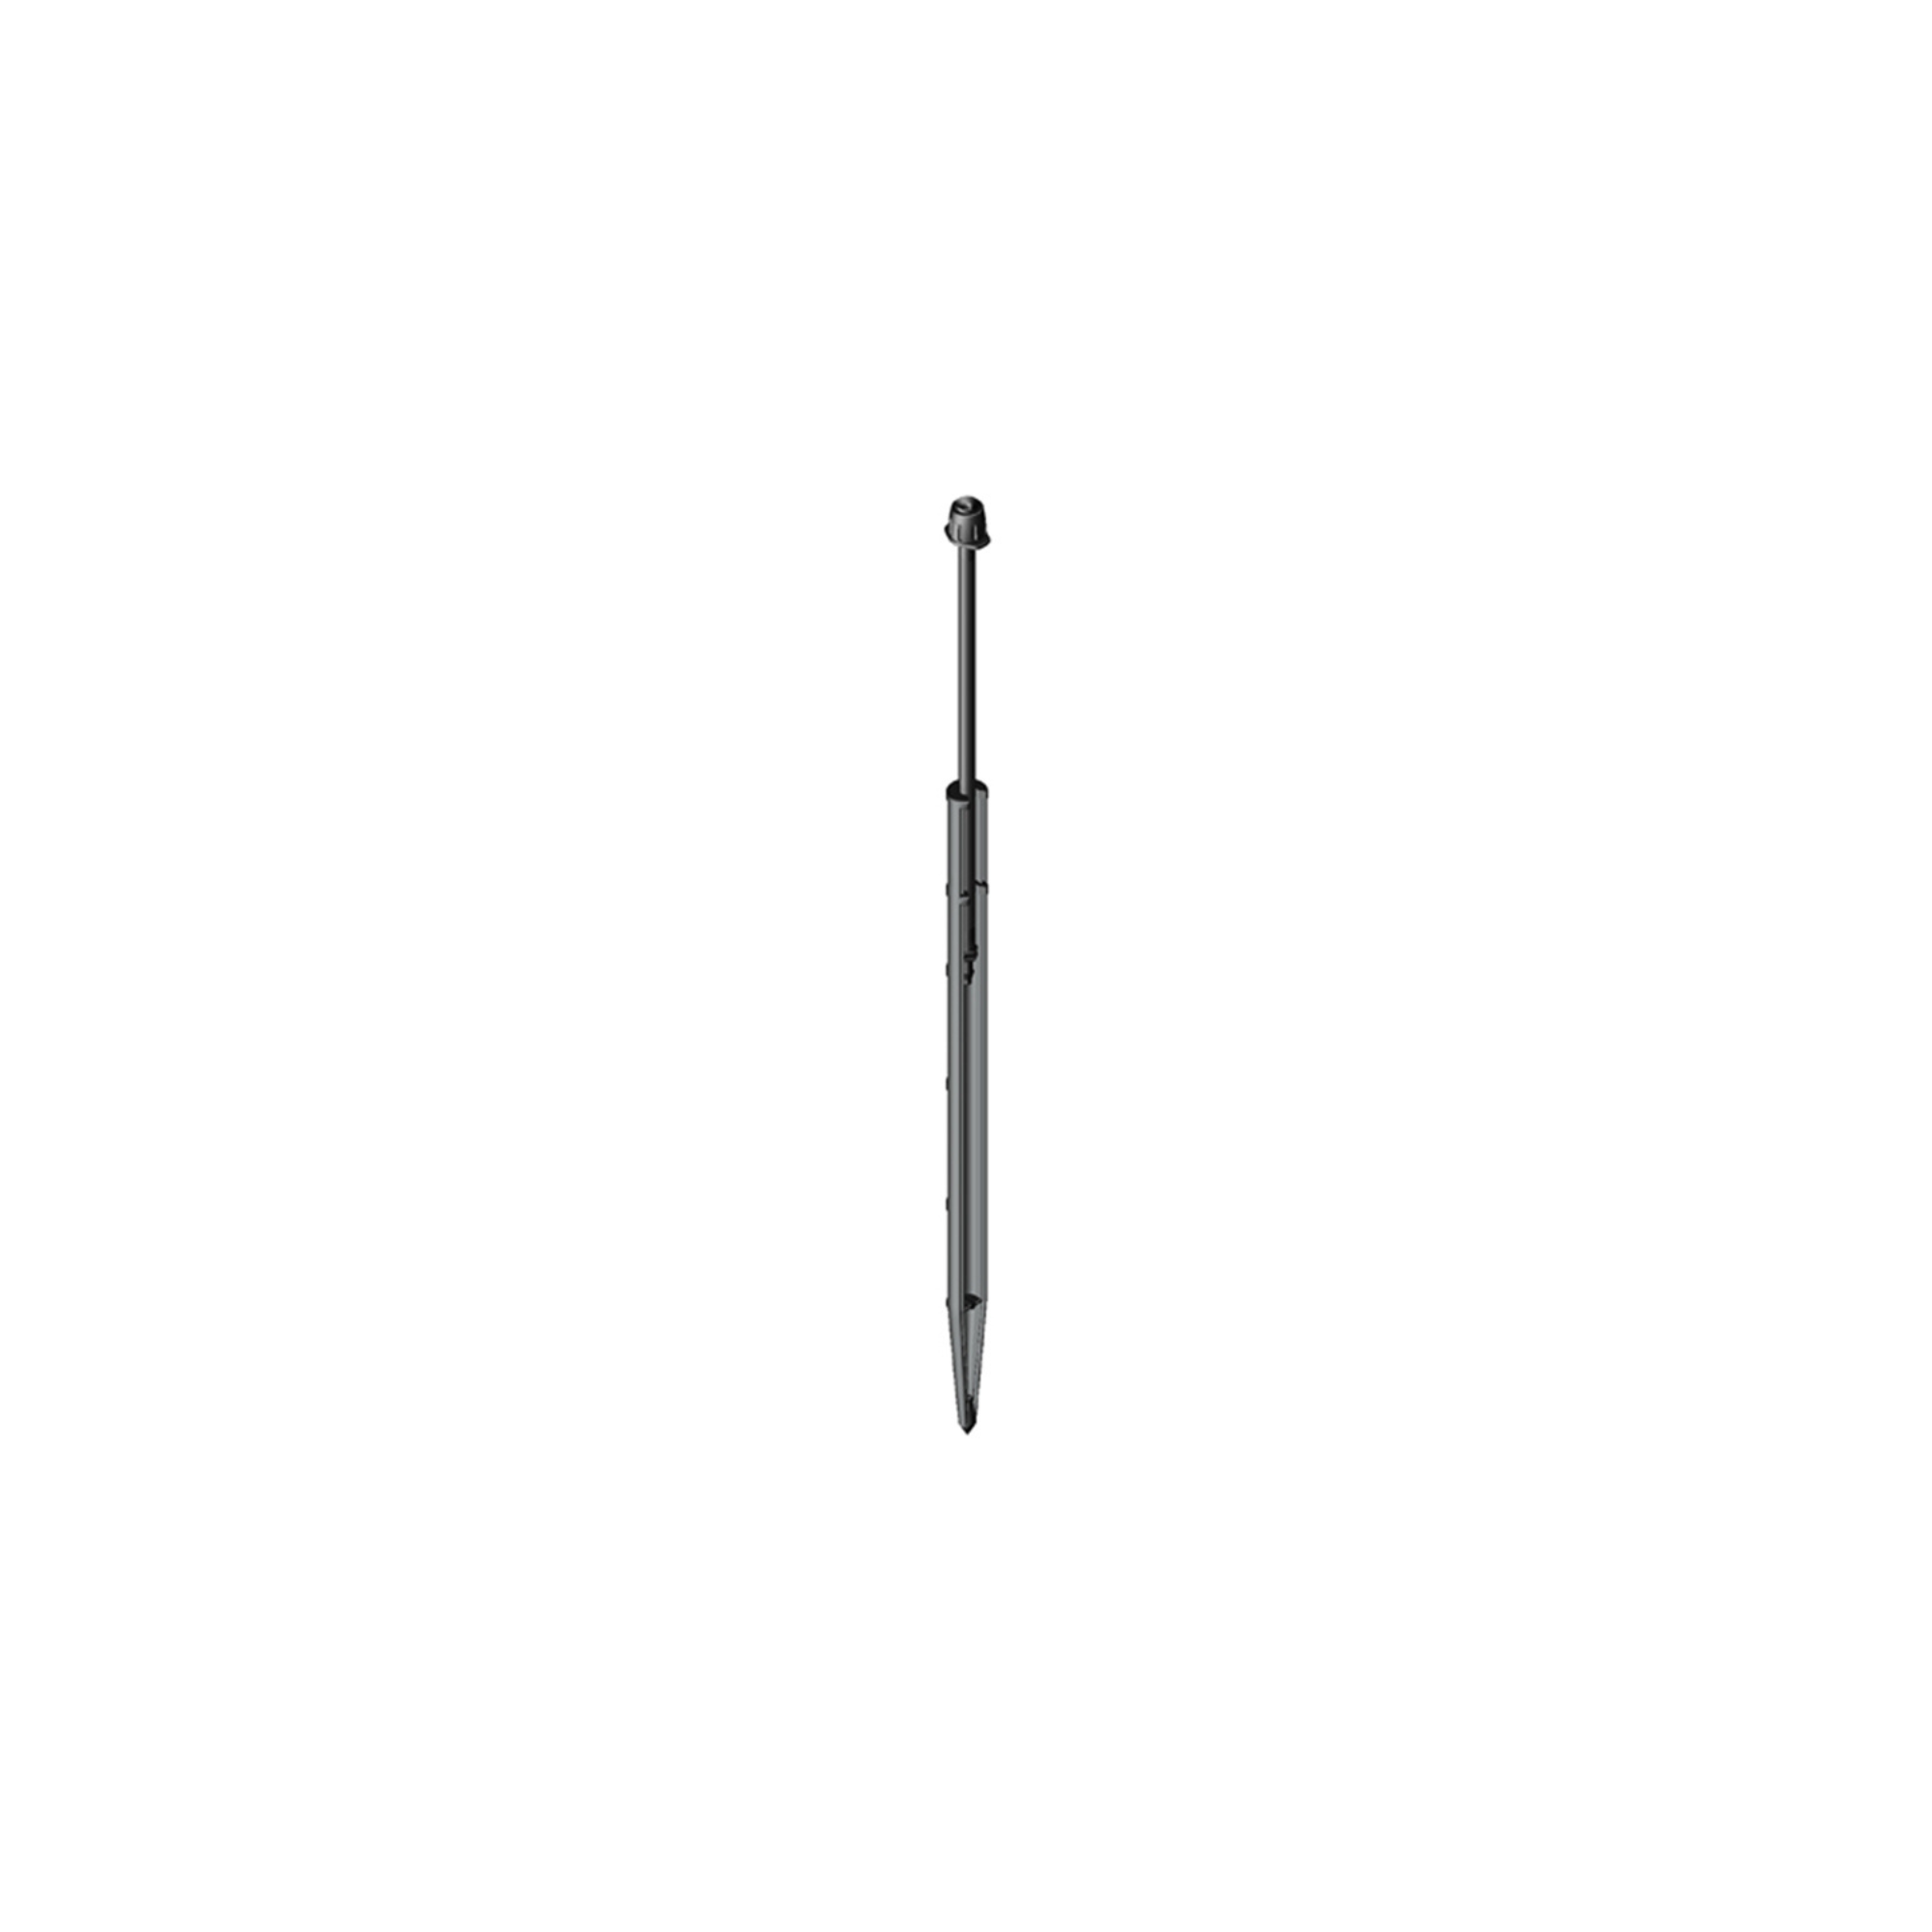 Riser Stake Assembly Adjustable Height